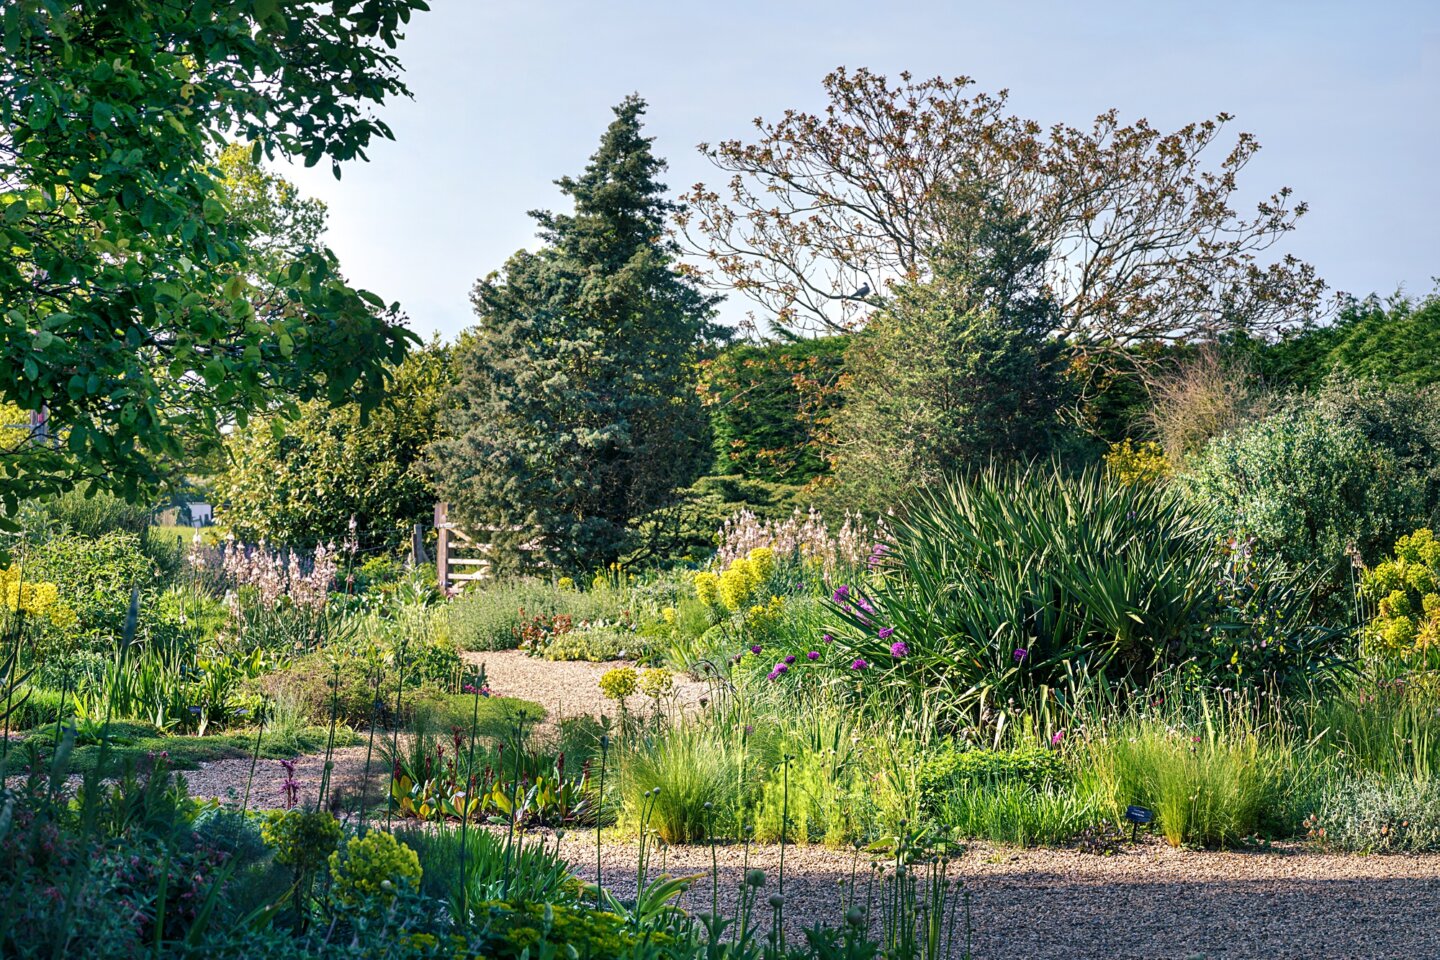 The 'winding dried-up riverbed' of the Gravel Garden, Beth Chatto